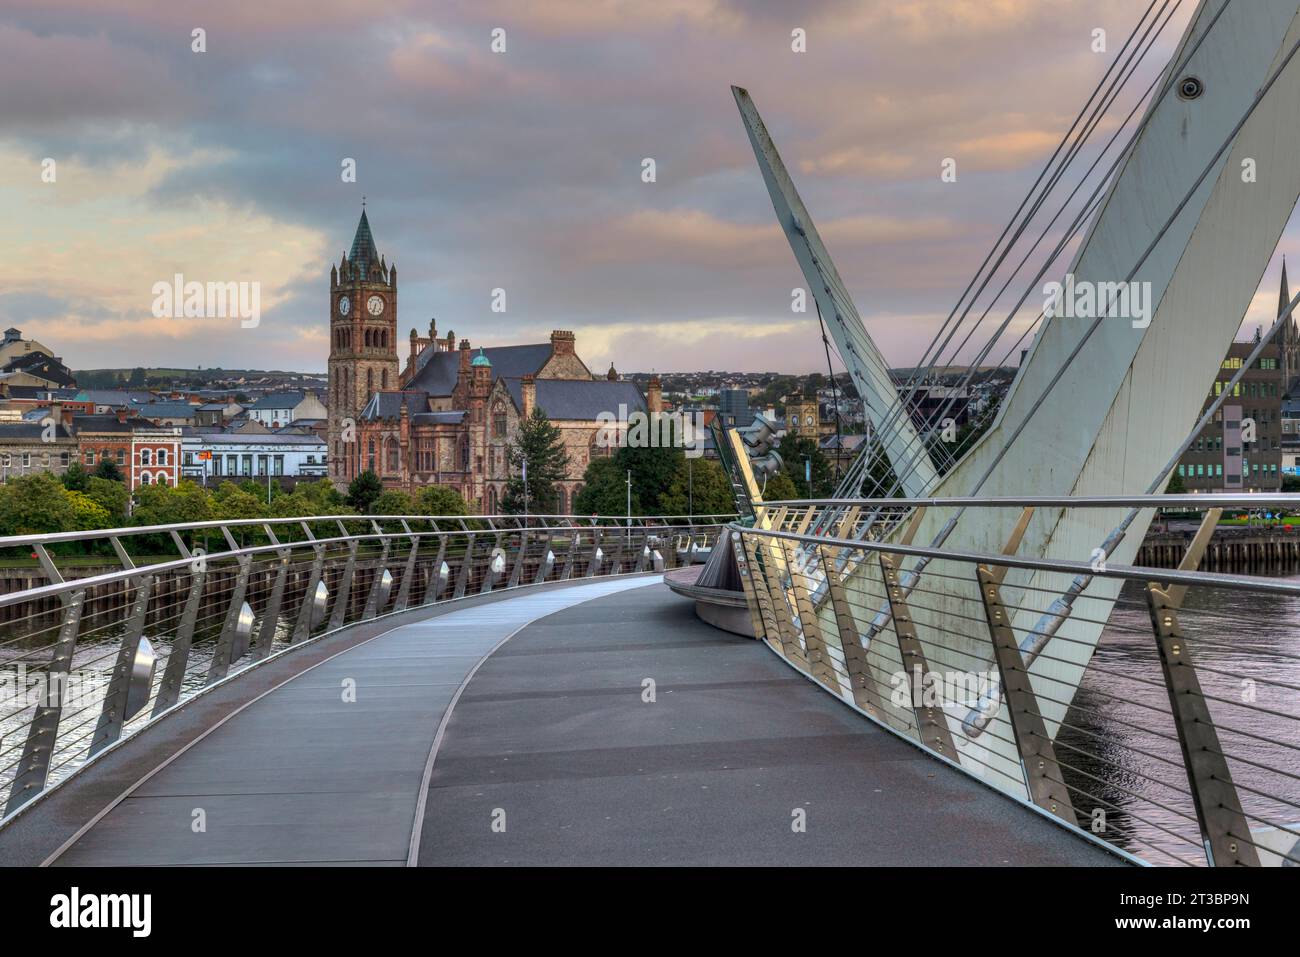 The Peace Bridge in Derry, Northern Ireland, is a symbol of hope and reconciliation, connecting two communities that were once divided by conflict. Stock Photo